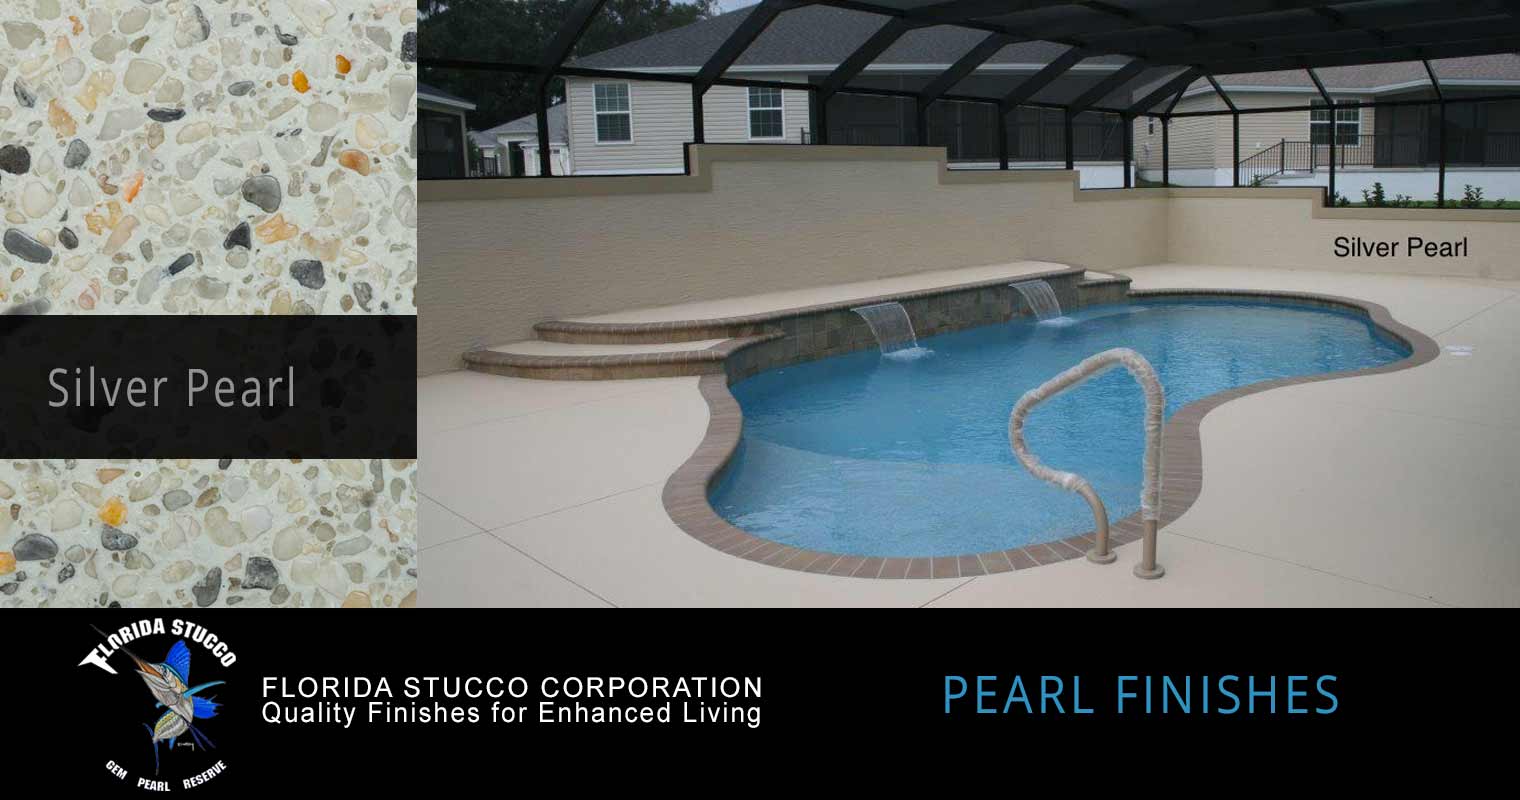 https://www.floridastucco.com/images/pearl-finishes/silver-pearl-finish-pool.jpg